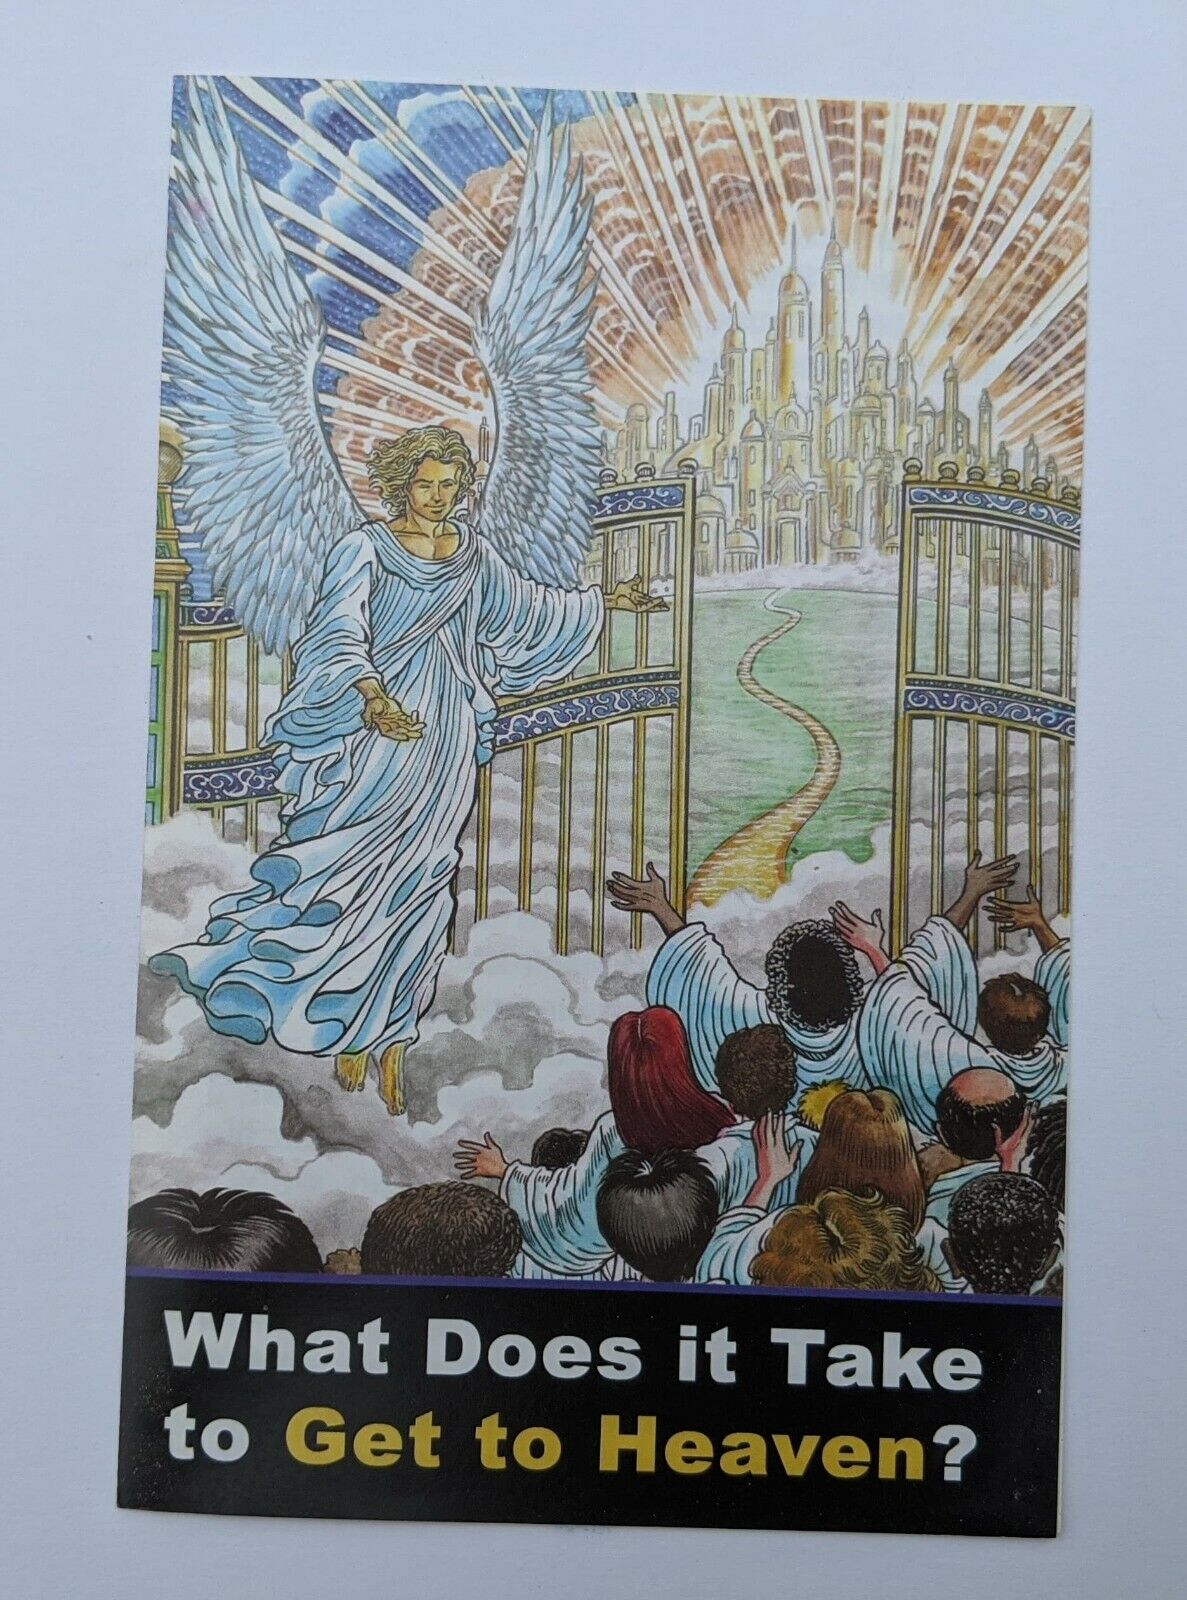 100 Heaven Angel Gospel Tracts! At Cost! Free Shipping! Share Your Faith In God